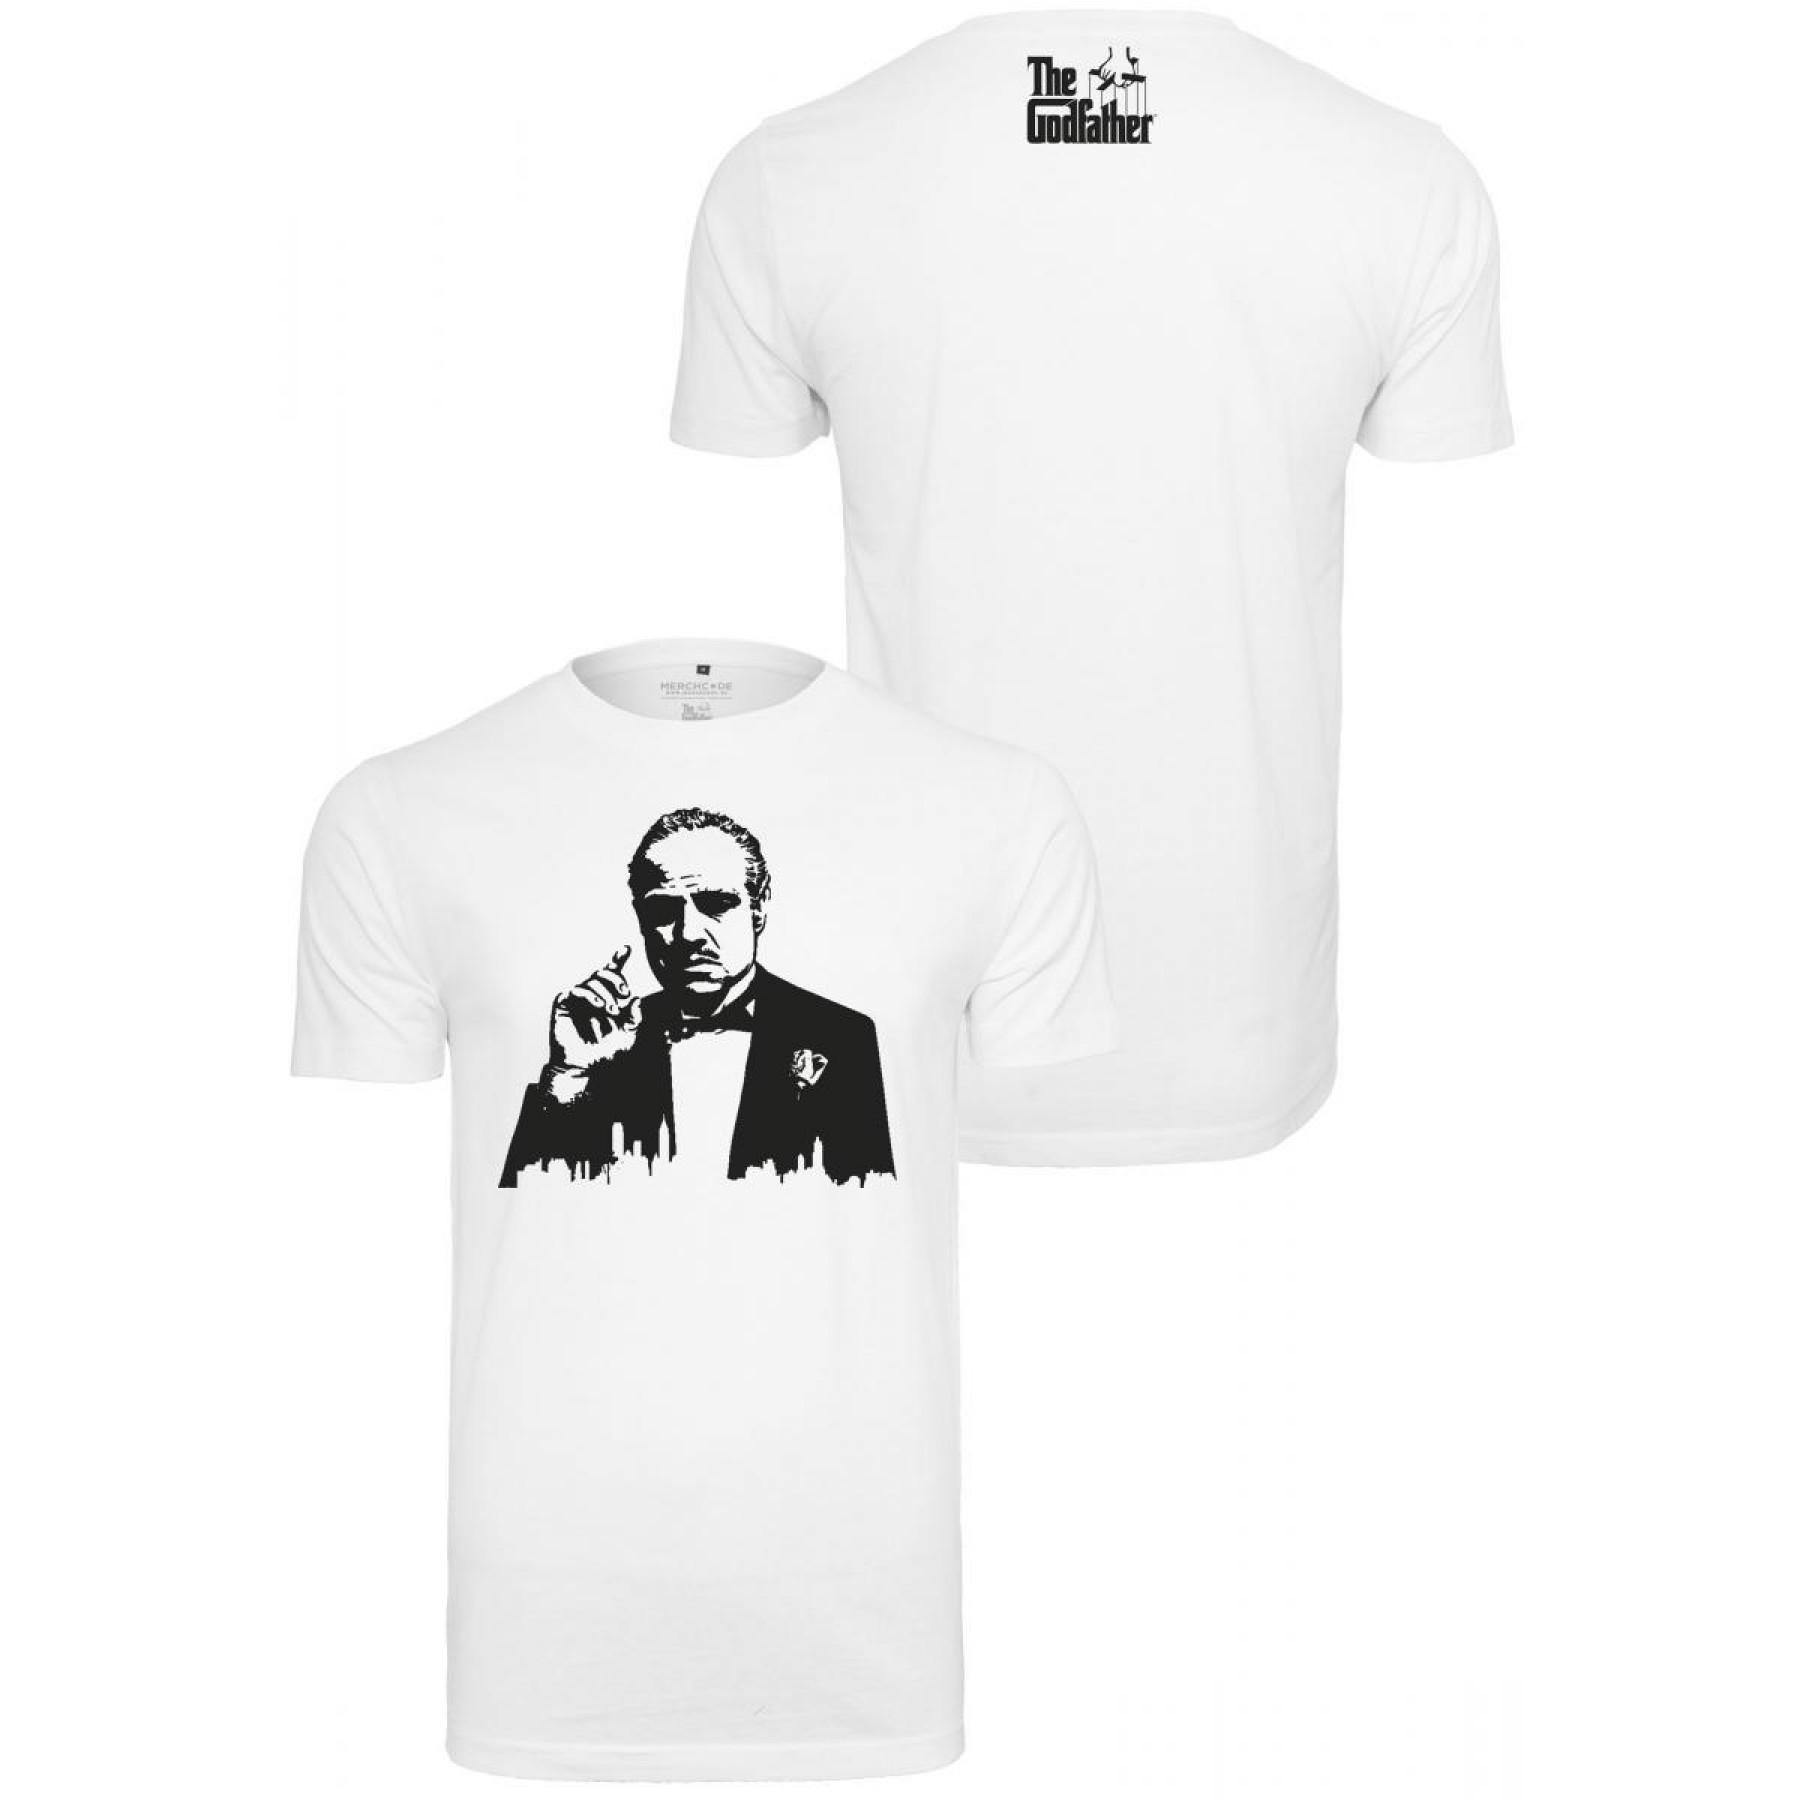 T-shirt Urban Classic godfather painted